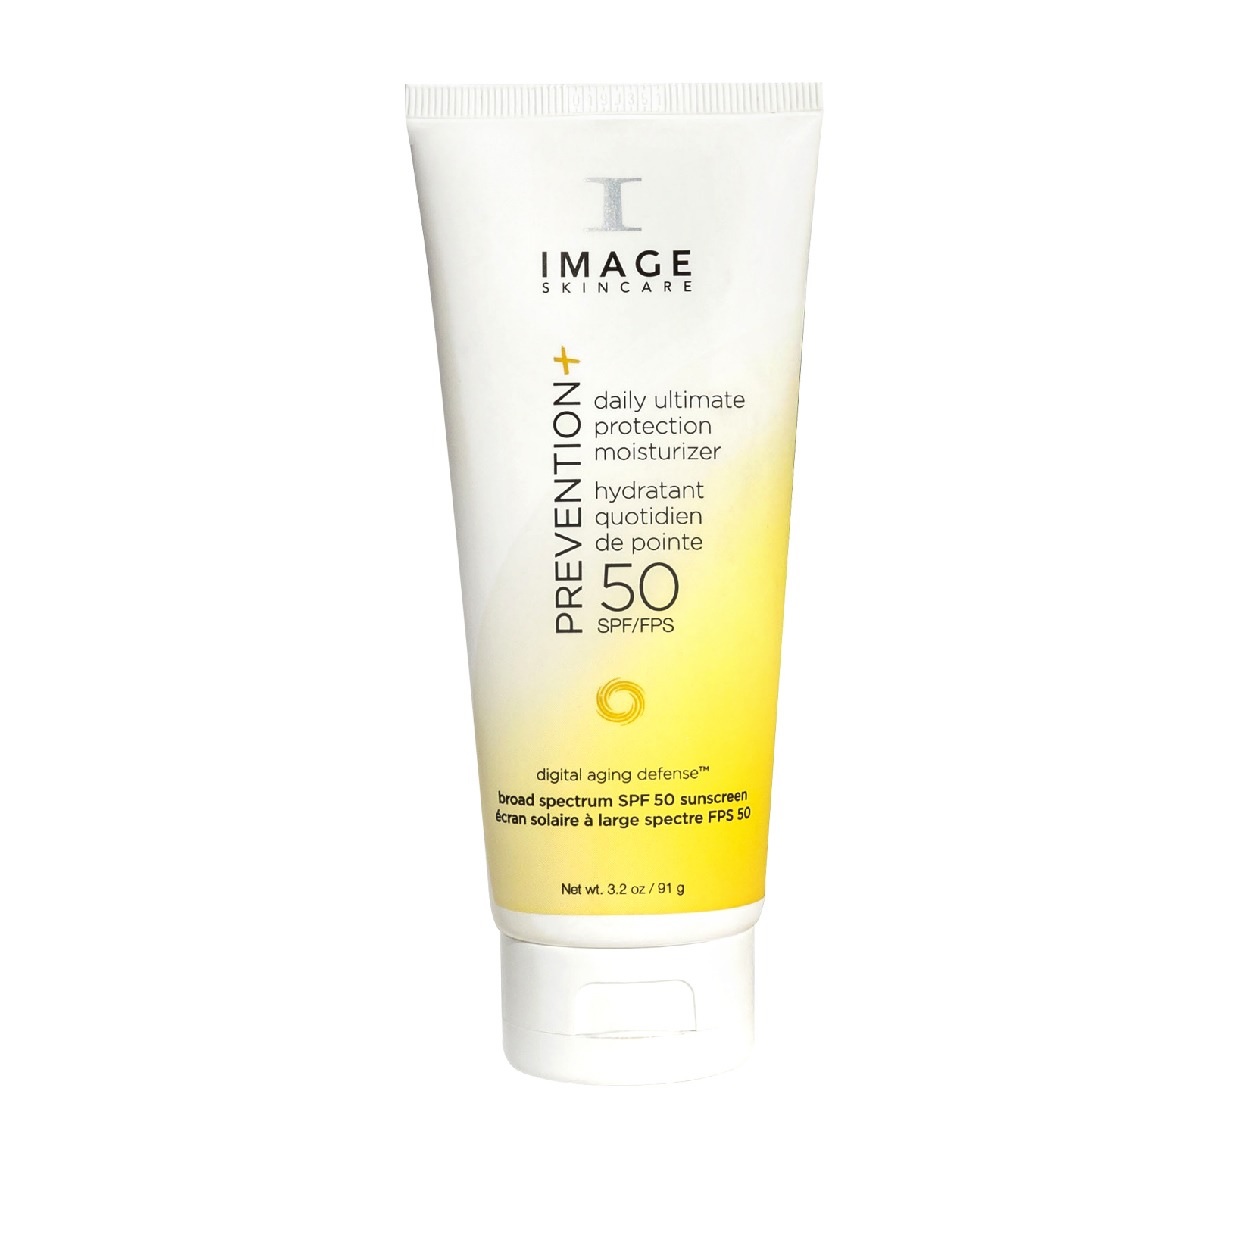 /image-skincare-prevention-daily-ultimate-protection-moisturizer-spf-50